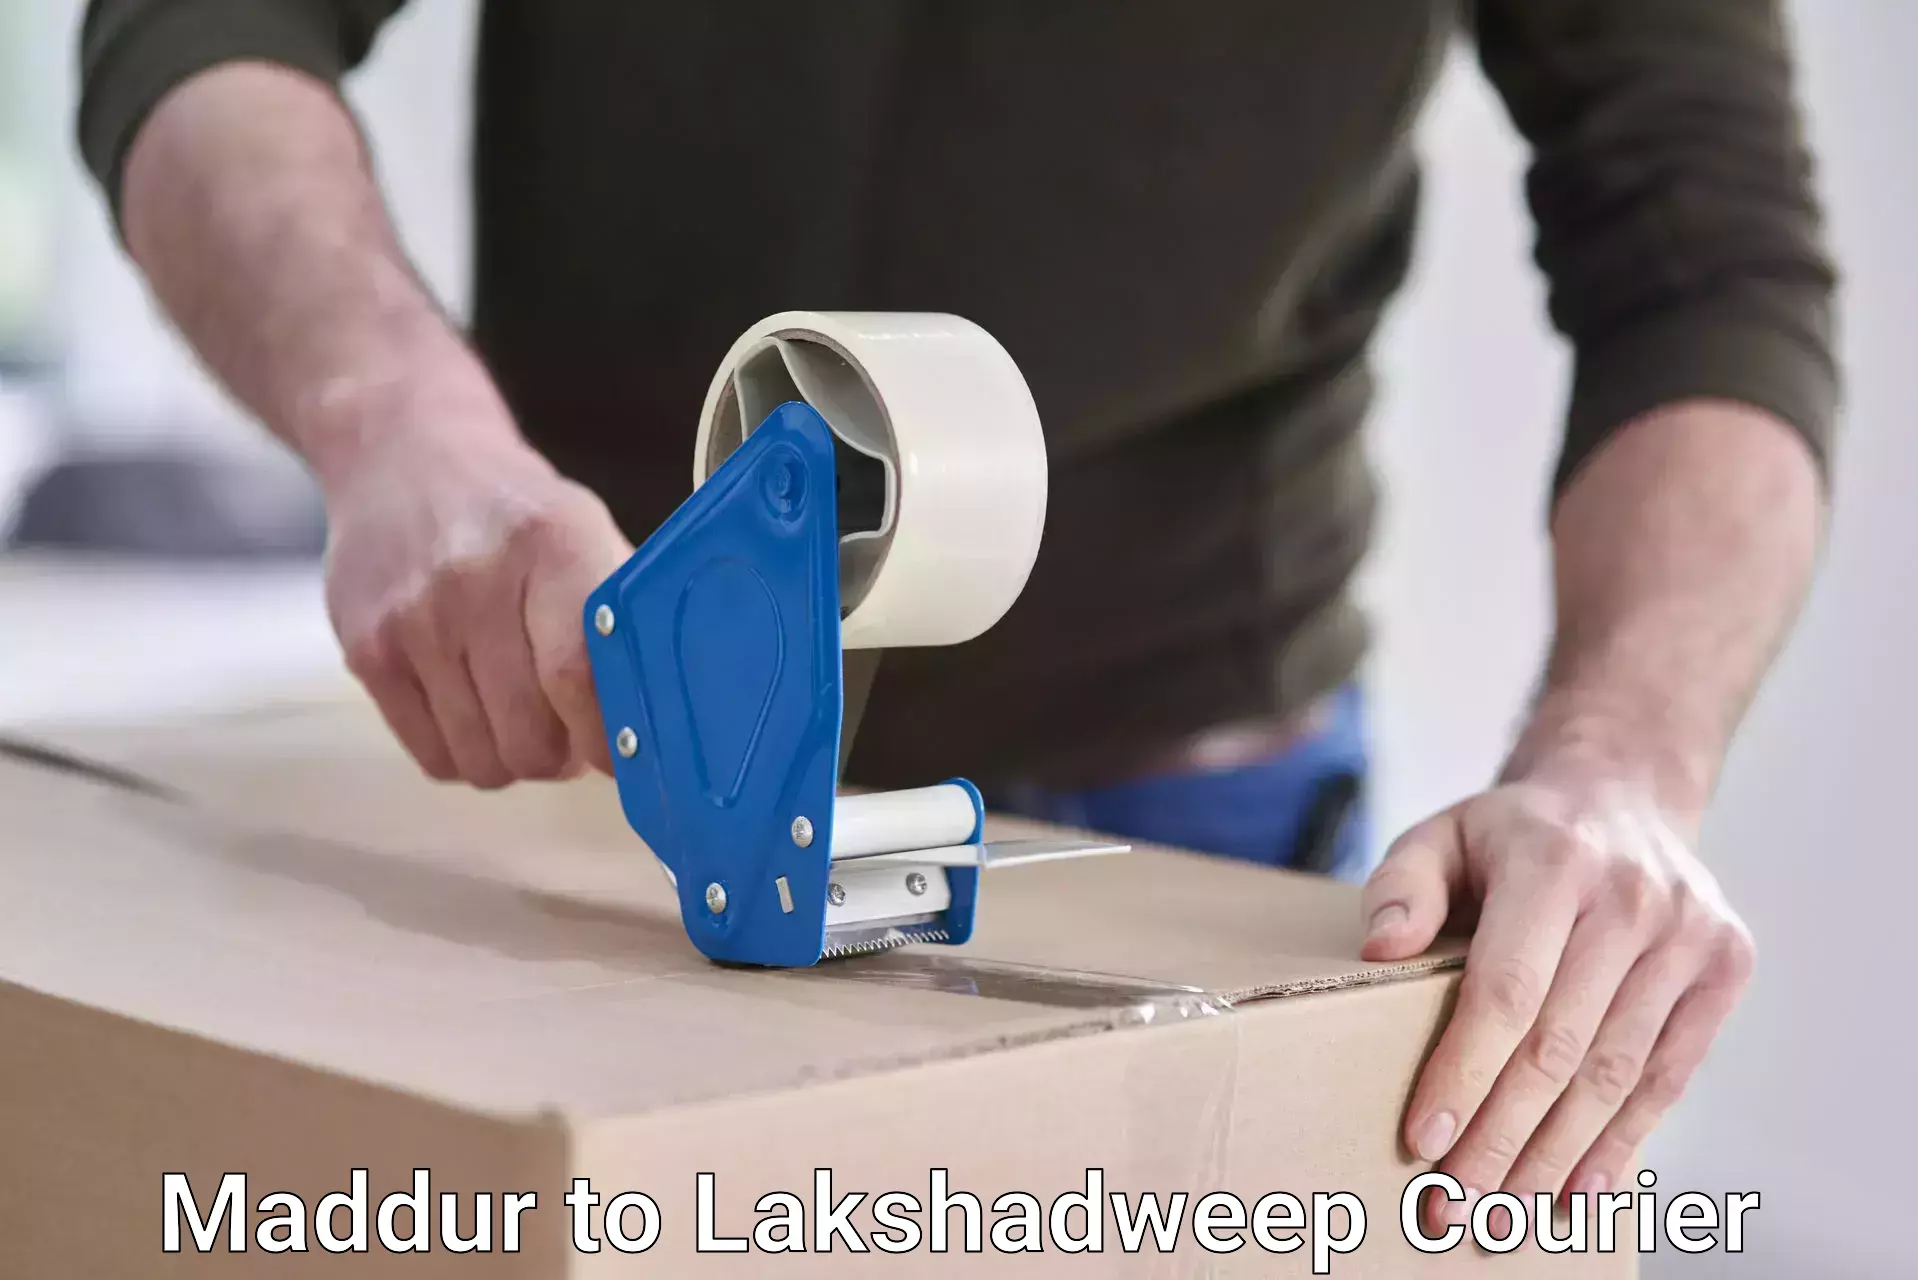 Nationwide courier service Maddur to Lakshadweep